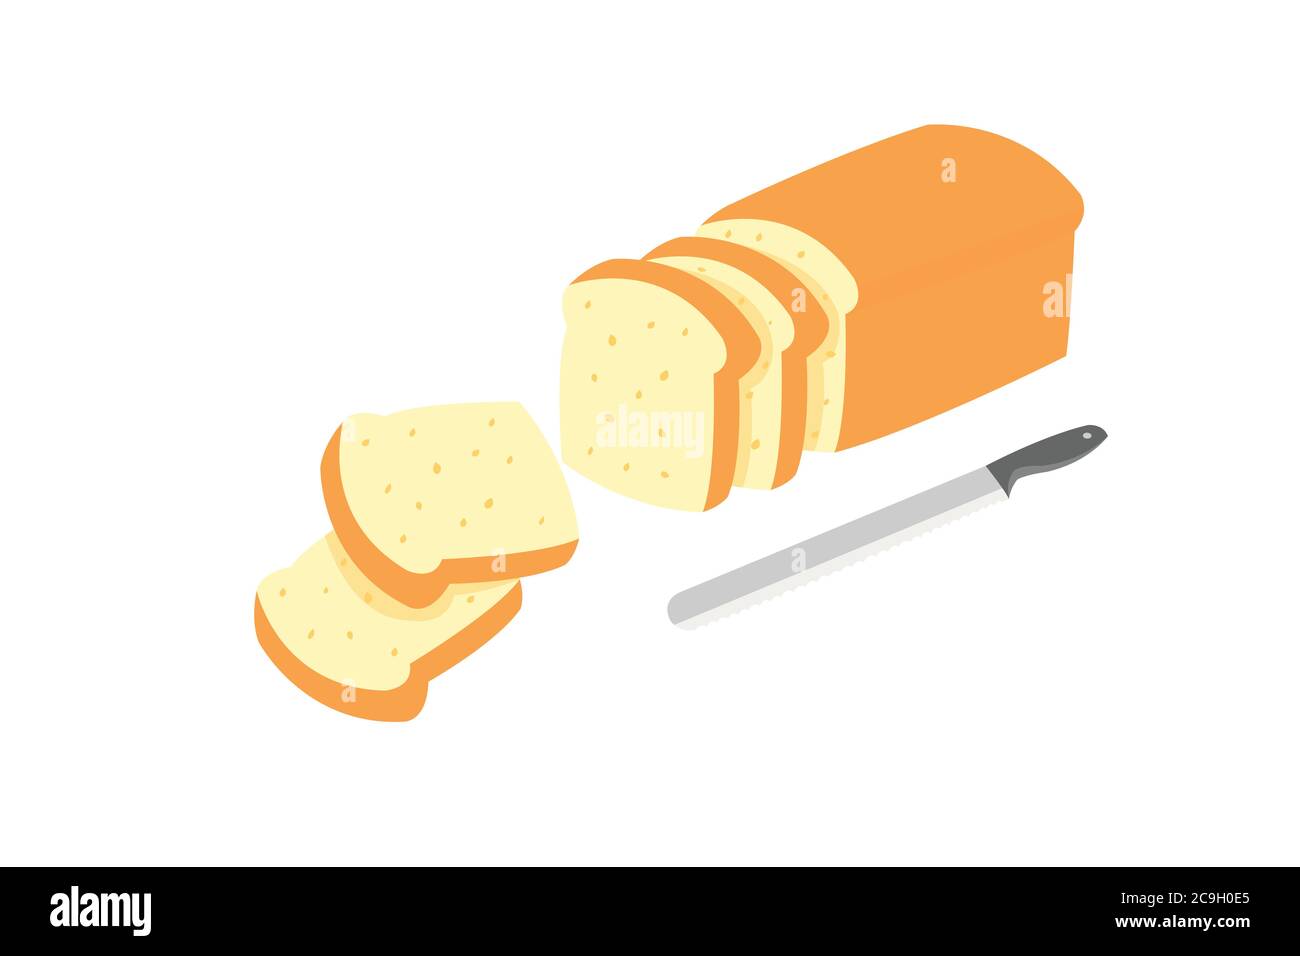 Bread and knives for slicing bread isolated on white background. Stock Vector